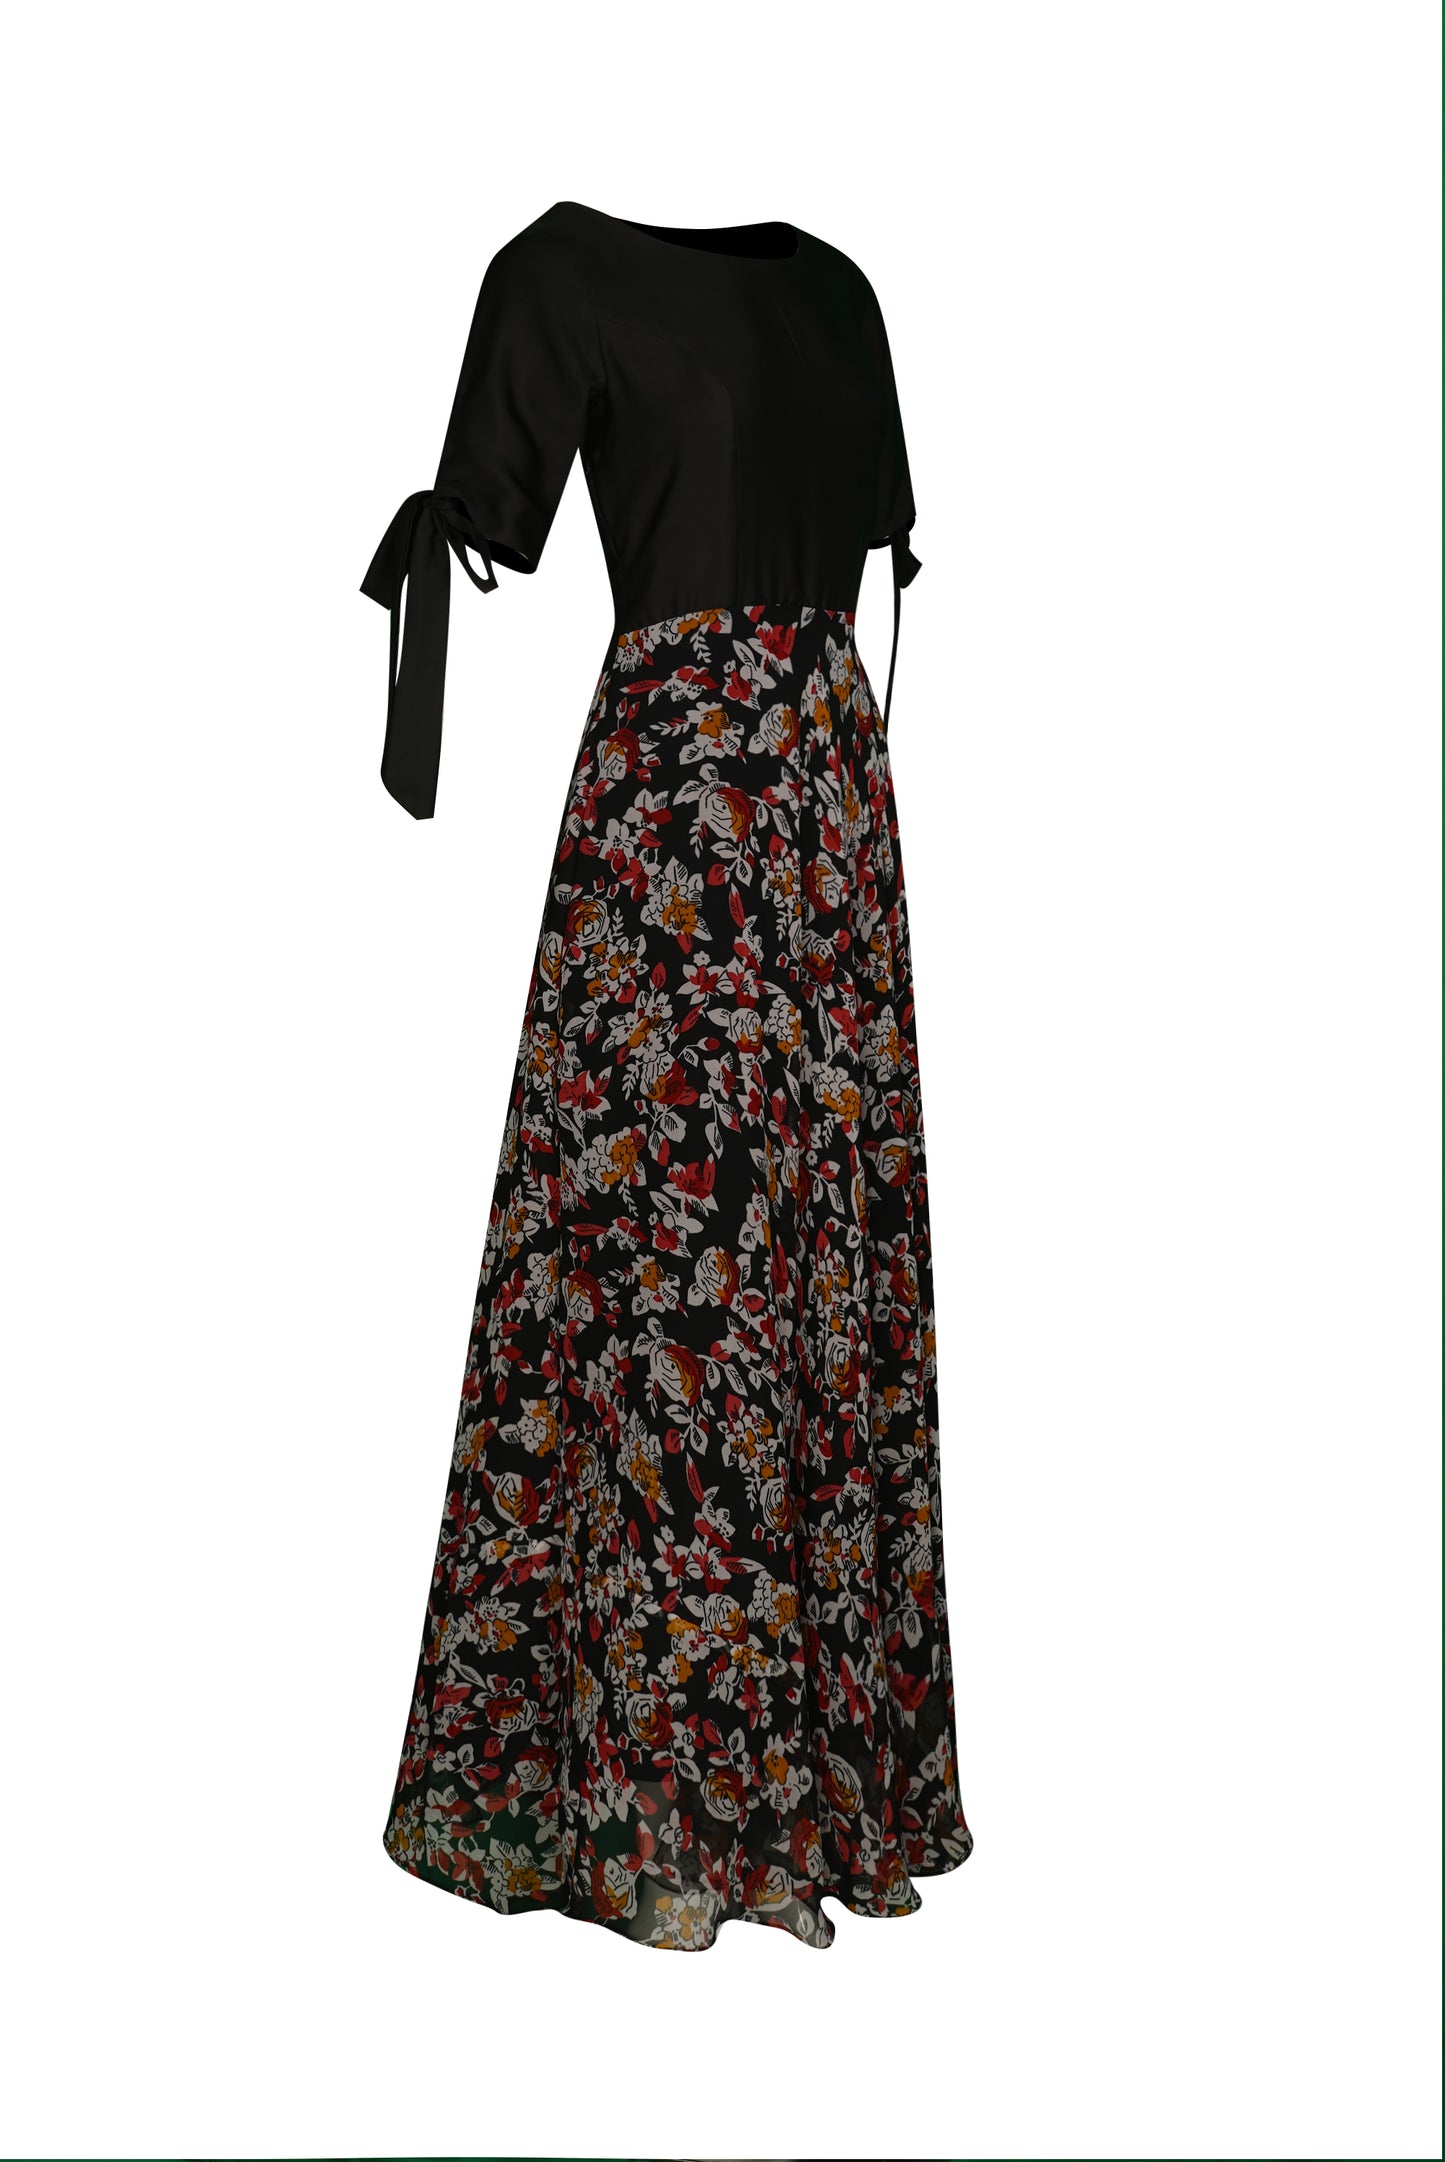 ZIA028 Black and Floral Printed Gown with Tie Sleeves